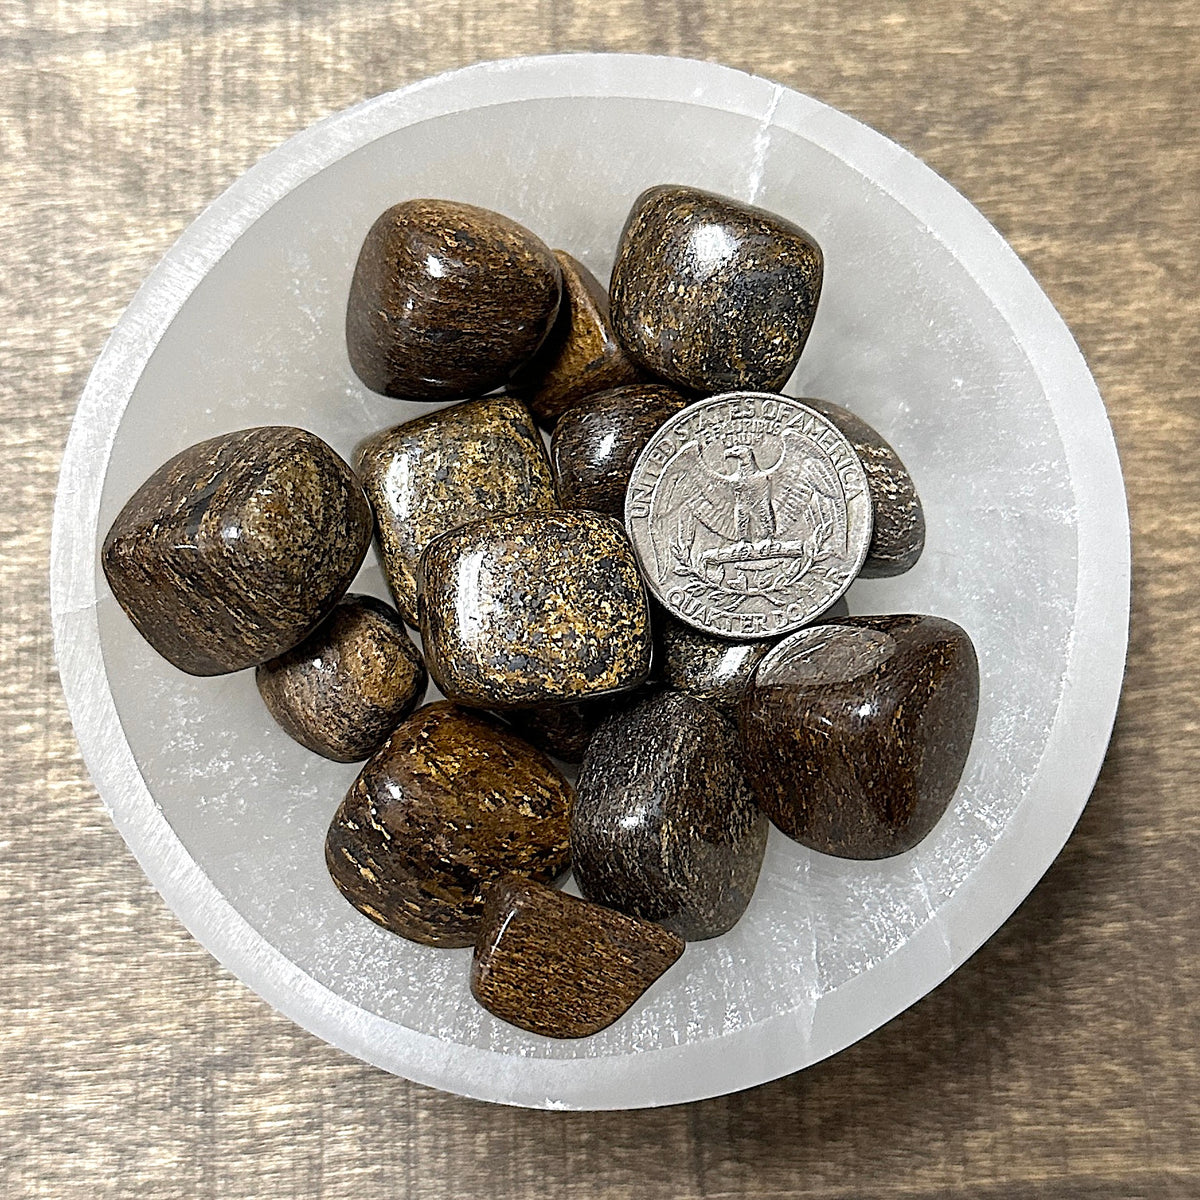 Comparison shot of a US quarter coin and various bronzite tumbled stones in a bowl